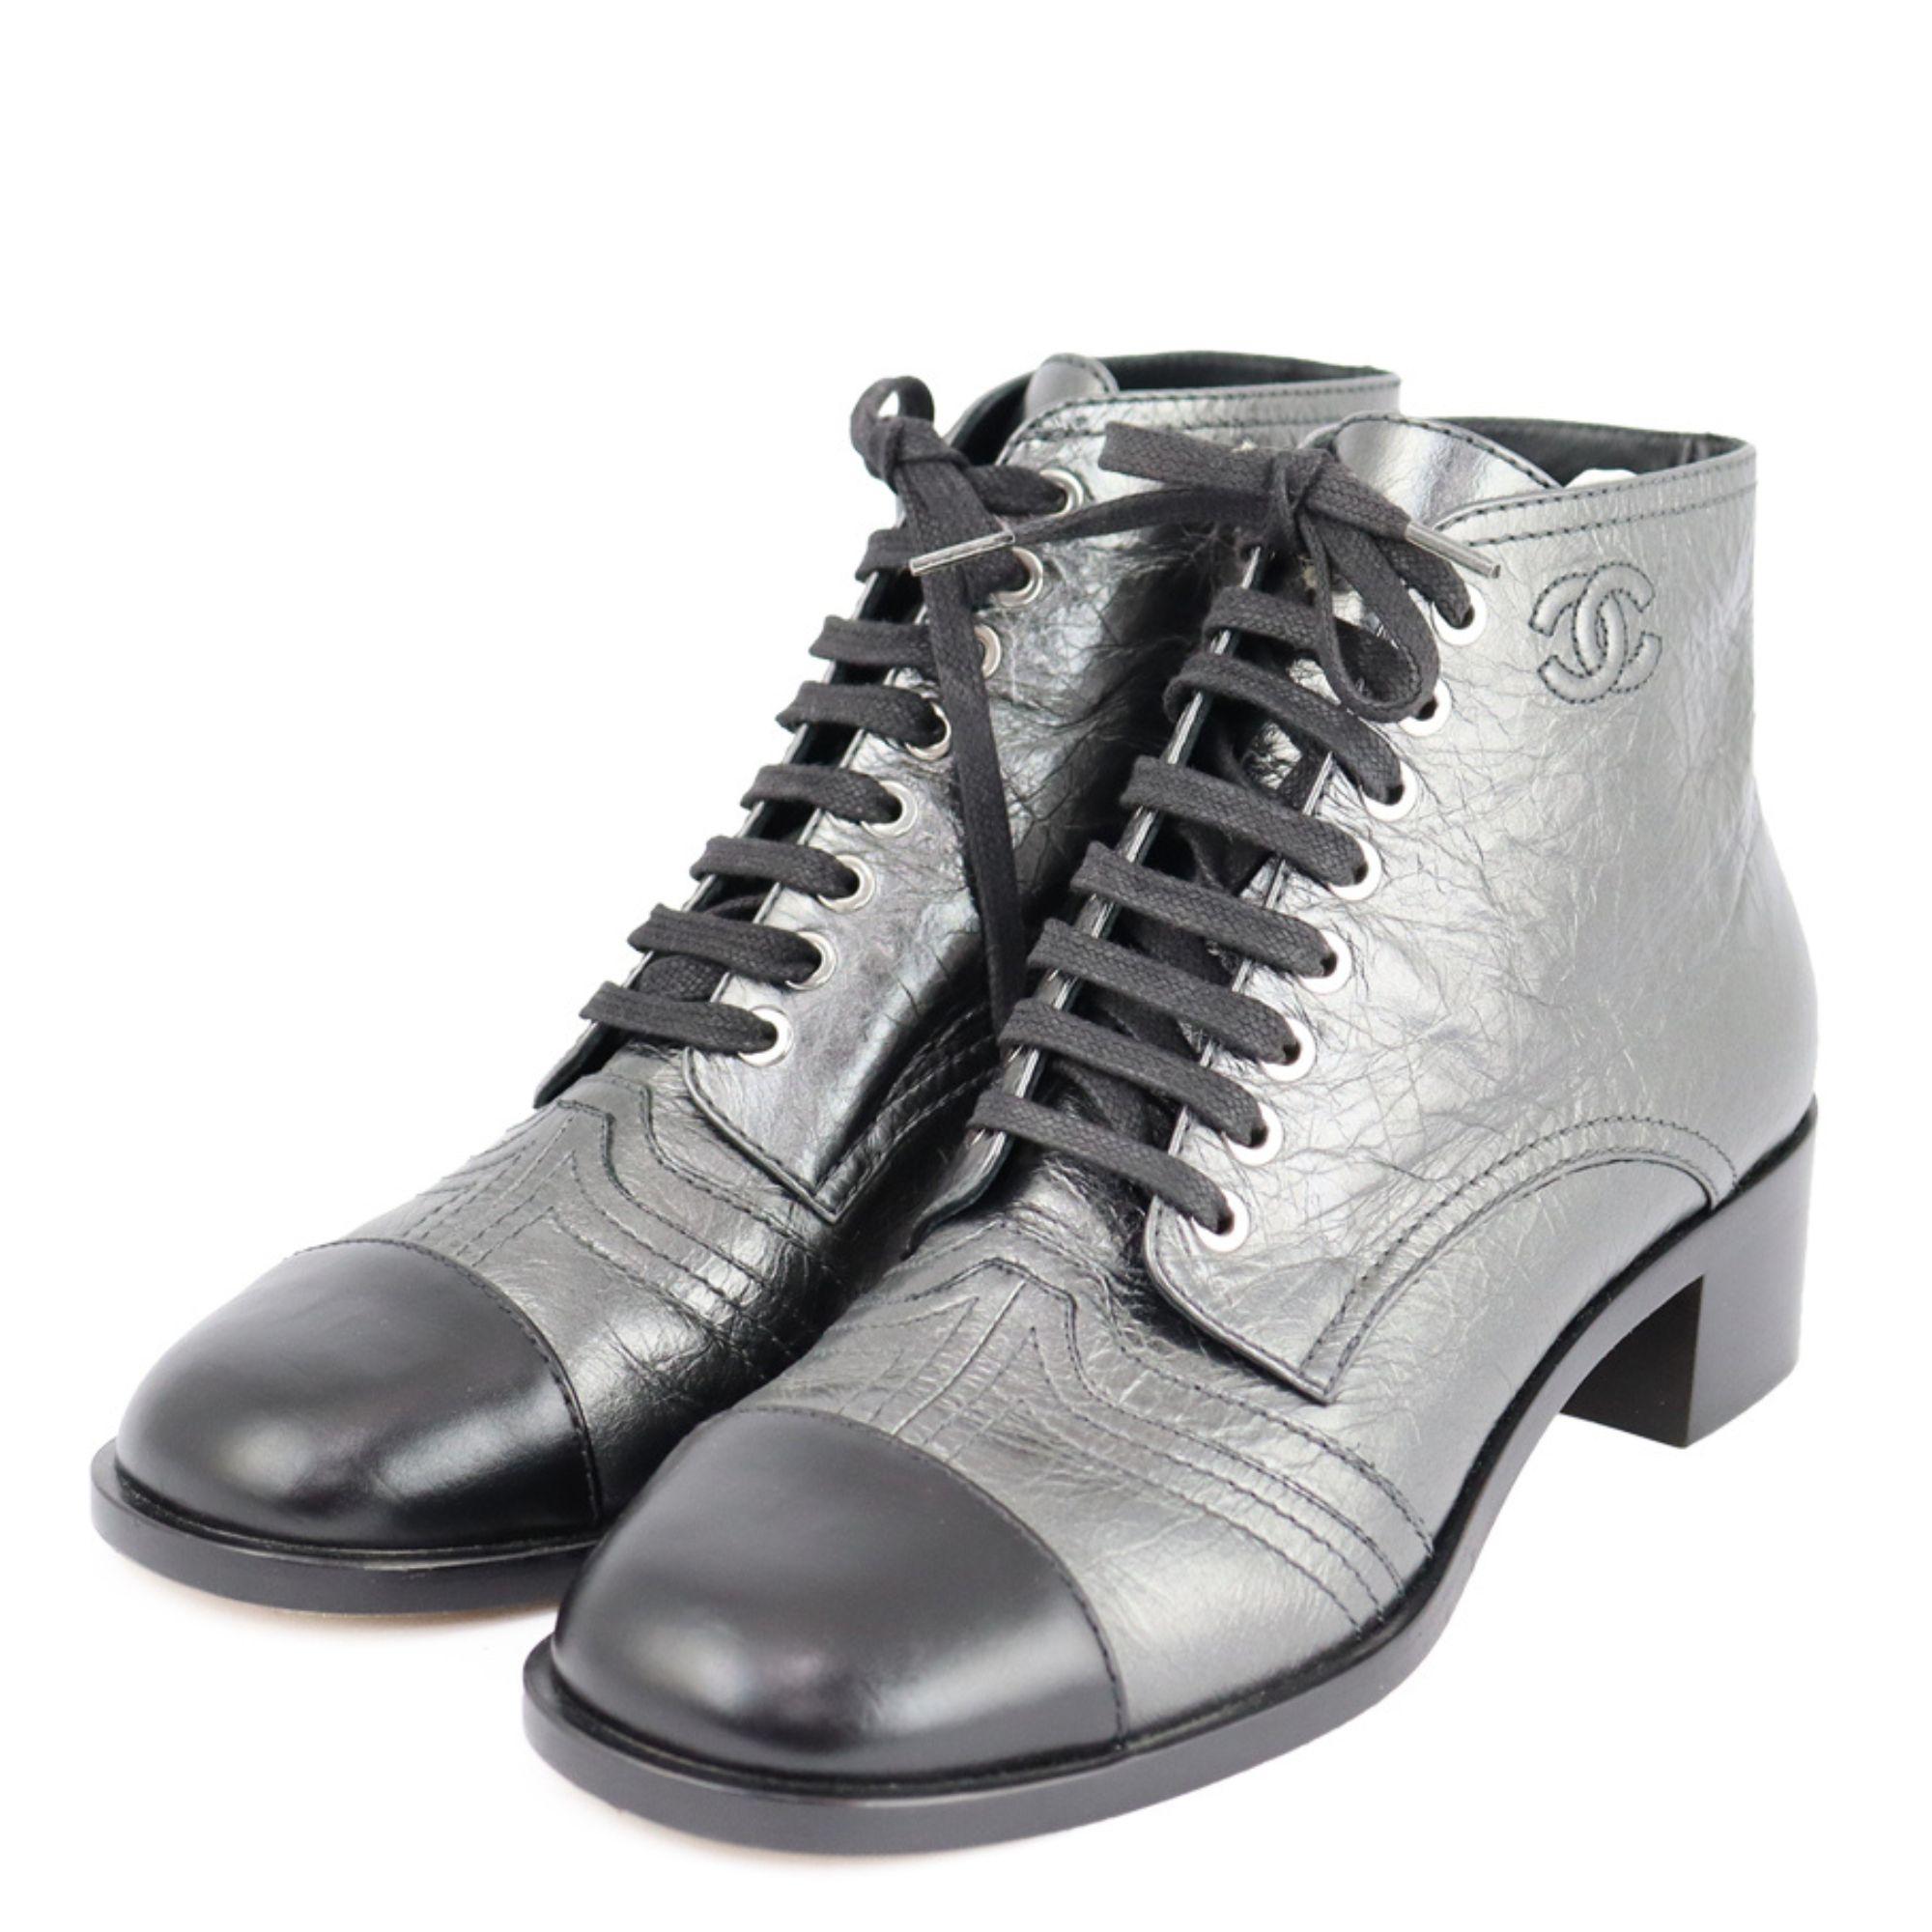 NEW Chanel black metallic CC leather cap toe lace up ankle boots . Not worn

Material: leather
Size: EU 39
Heel: 3cm
Condition: New